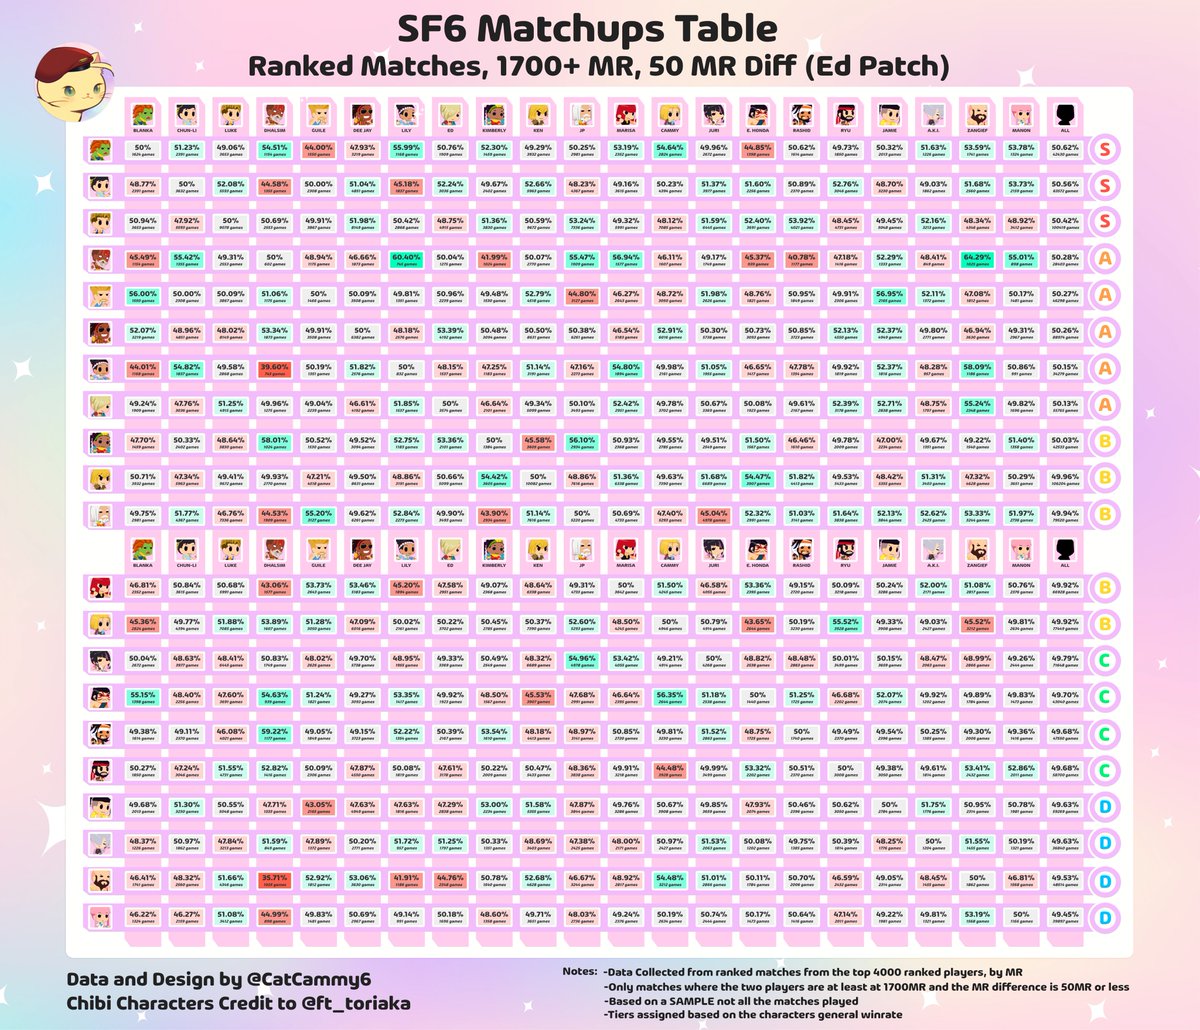 #StreetFighter6 #SF6 MR Matchups table, based on 1700+ MR, 50 MR Diff post Ed Patch. I will publish the ones for Legend/Less MR diff once my sample of games from this patch is big enough. If you appreciate my work, you can follow me or buy me a coffee! buymeacoffee.com/misaka06